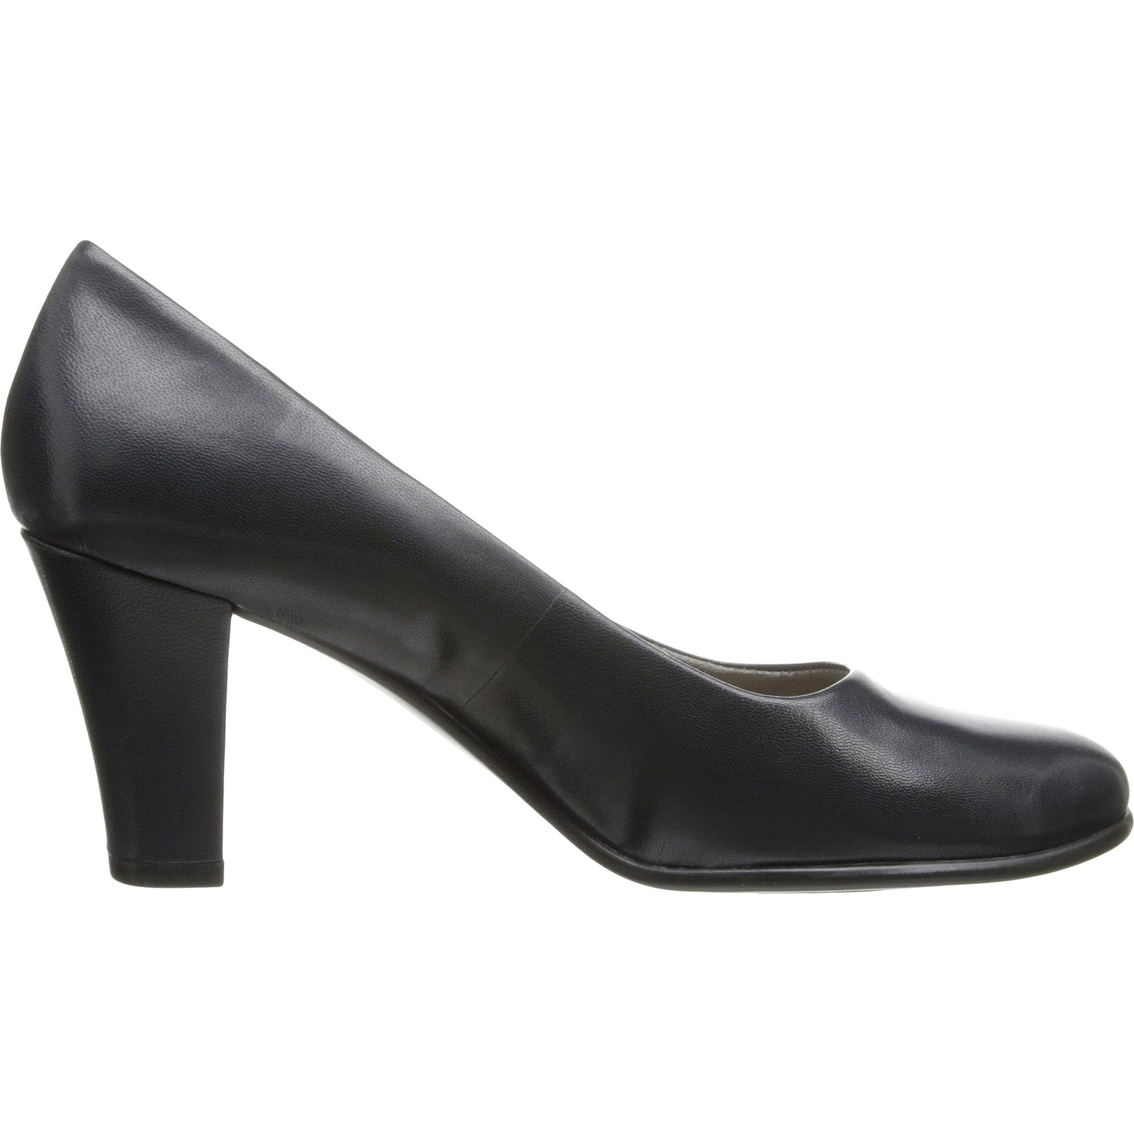 Aerosoles Dolled Up Dress Pumps | Rounded-toe | Shoes | Shop The Exchange